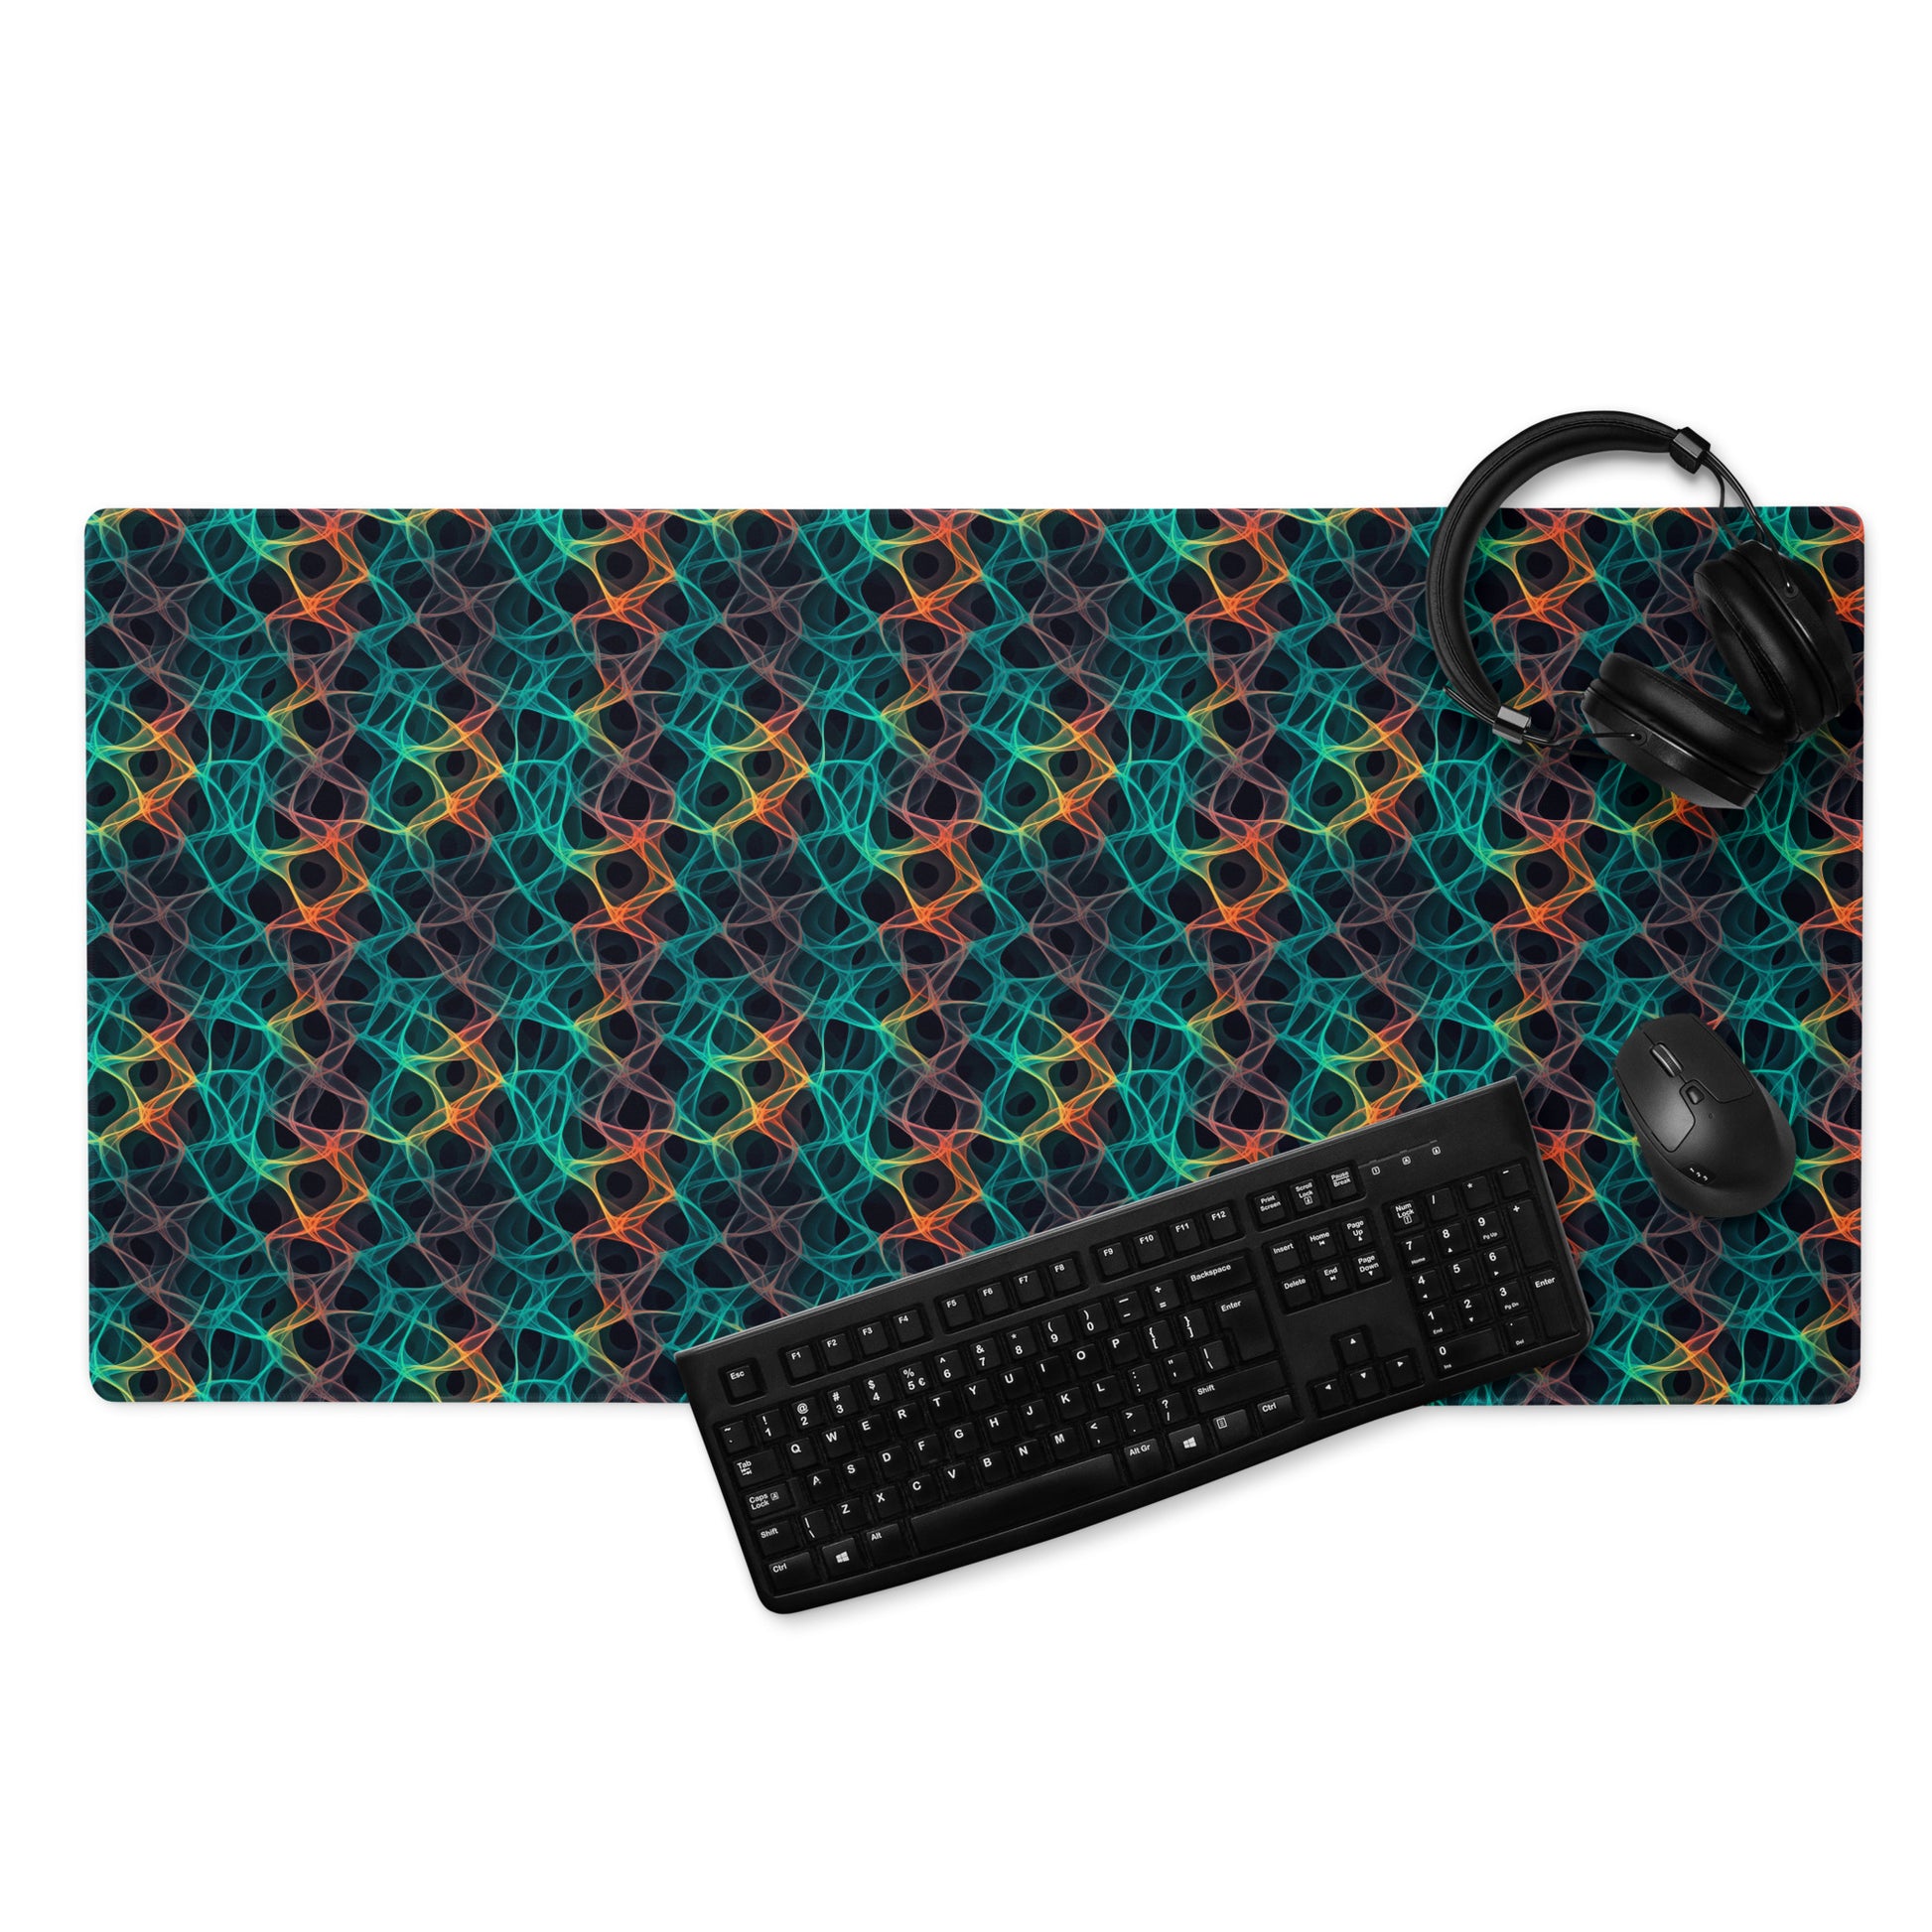 A 36" x 18" desk pad with an abstract pattern resembling a cell structure on it displayed with a keyboard, headphones and a mouse. Rainbow in color.